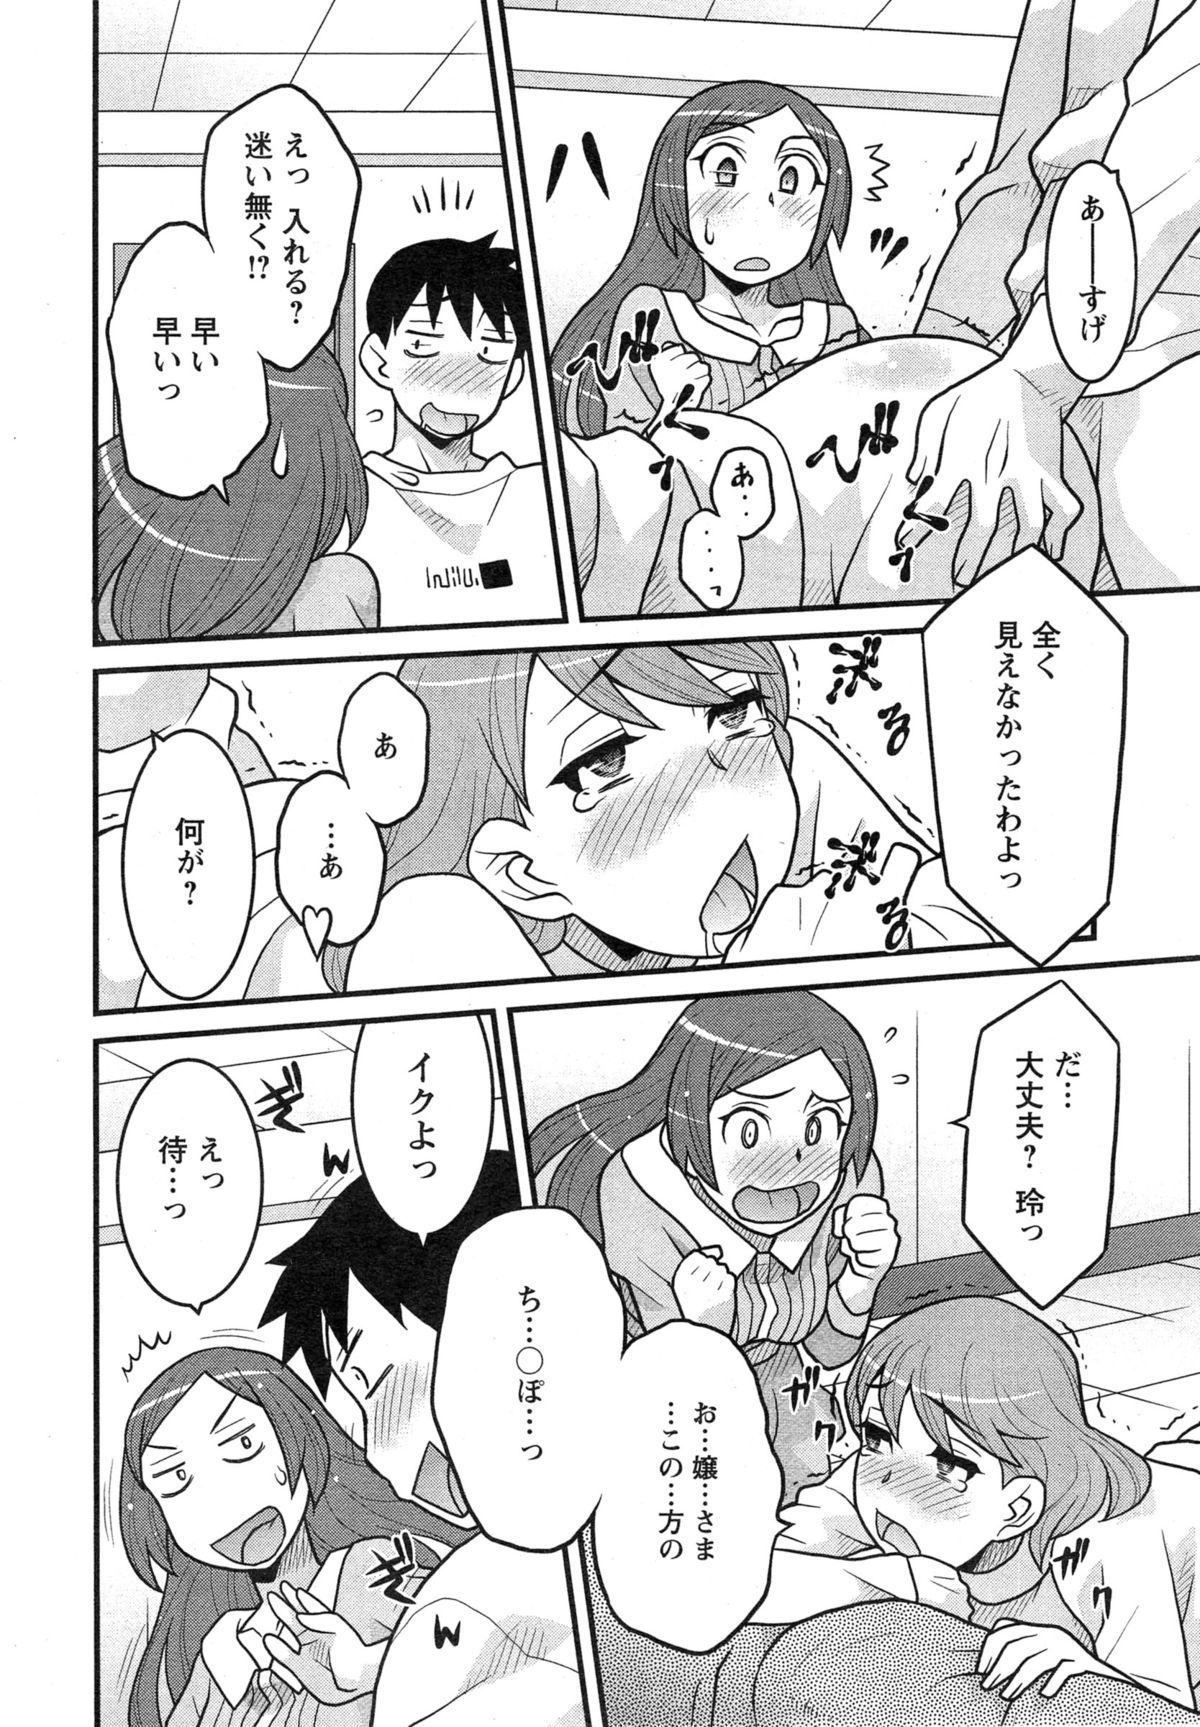 Action Pizazz DX 2015-03 page 20 full